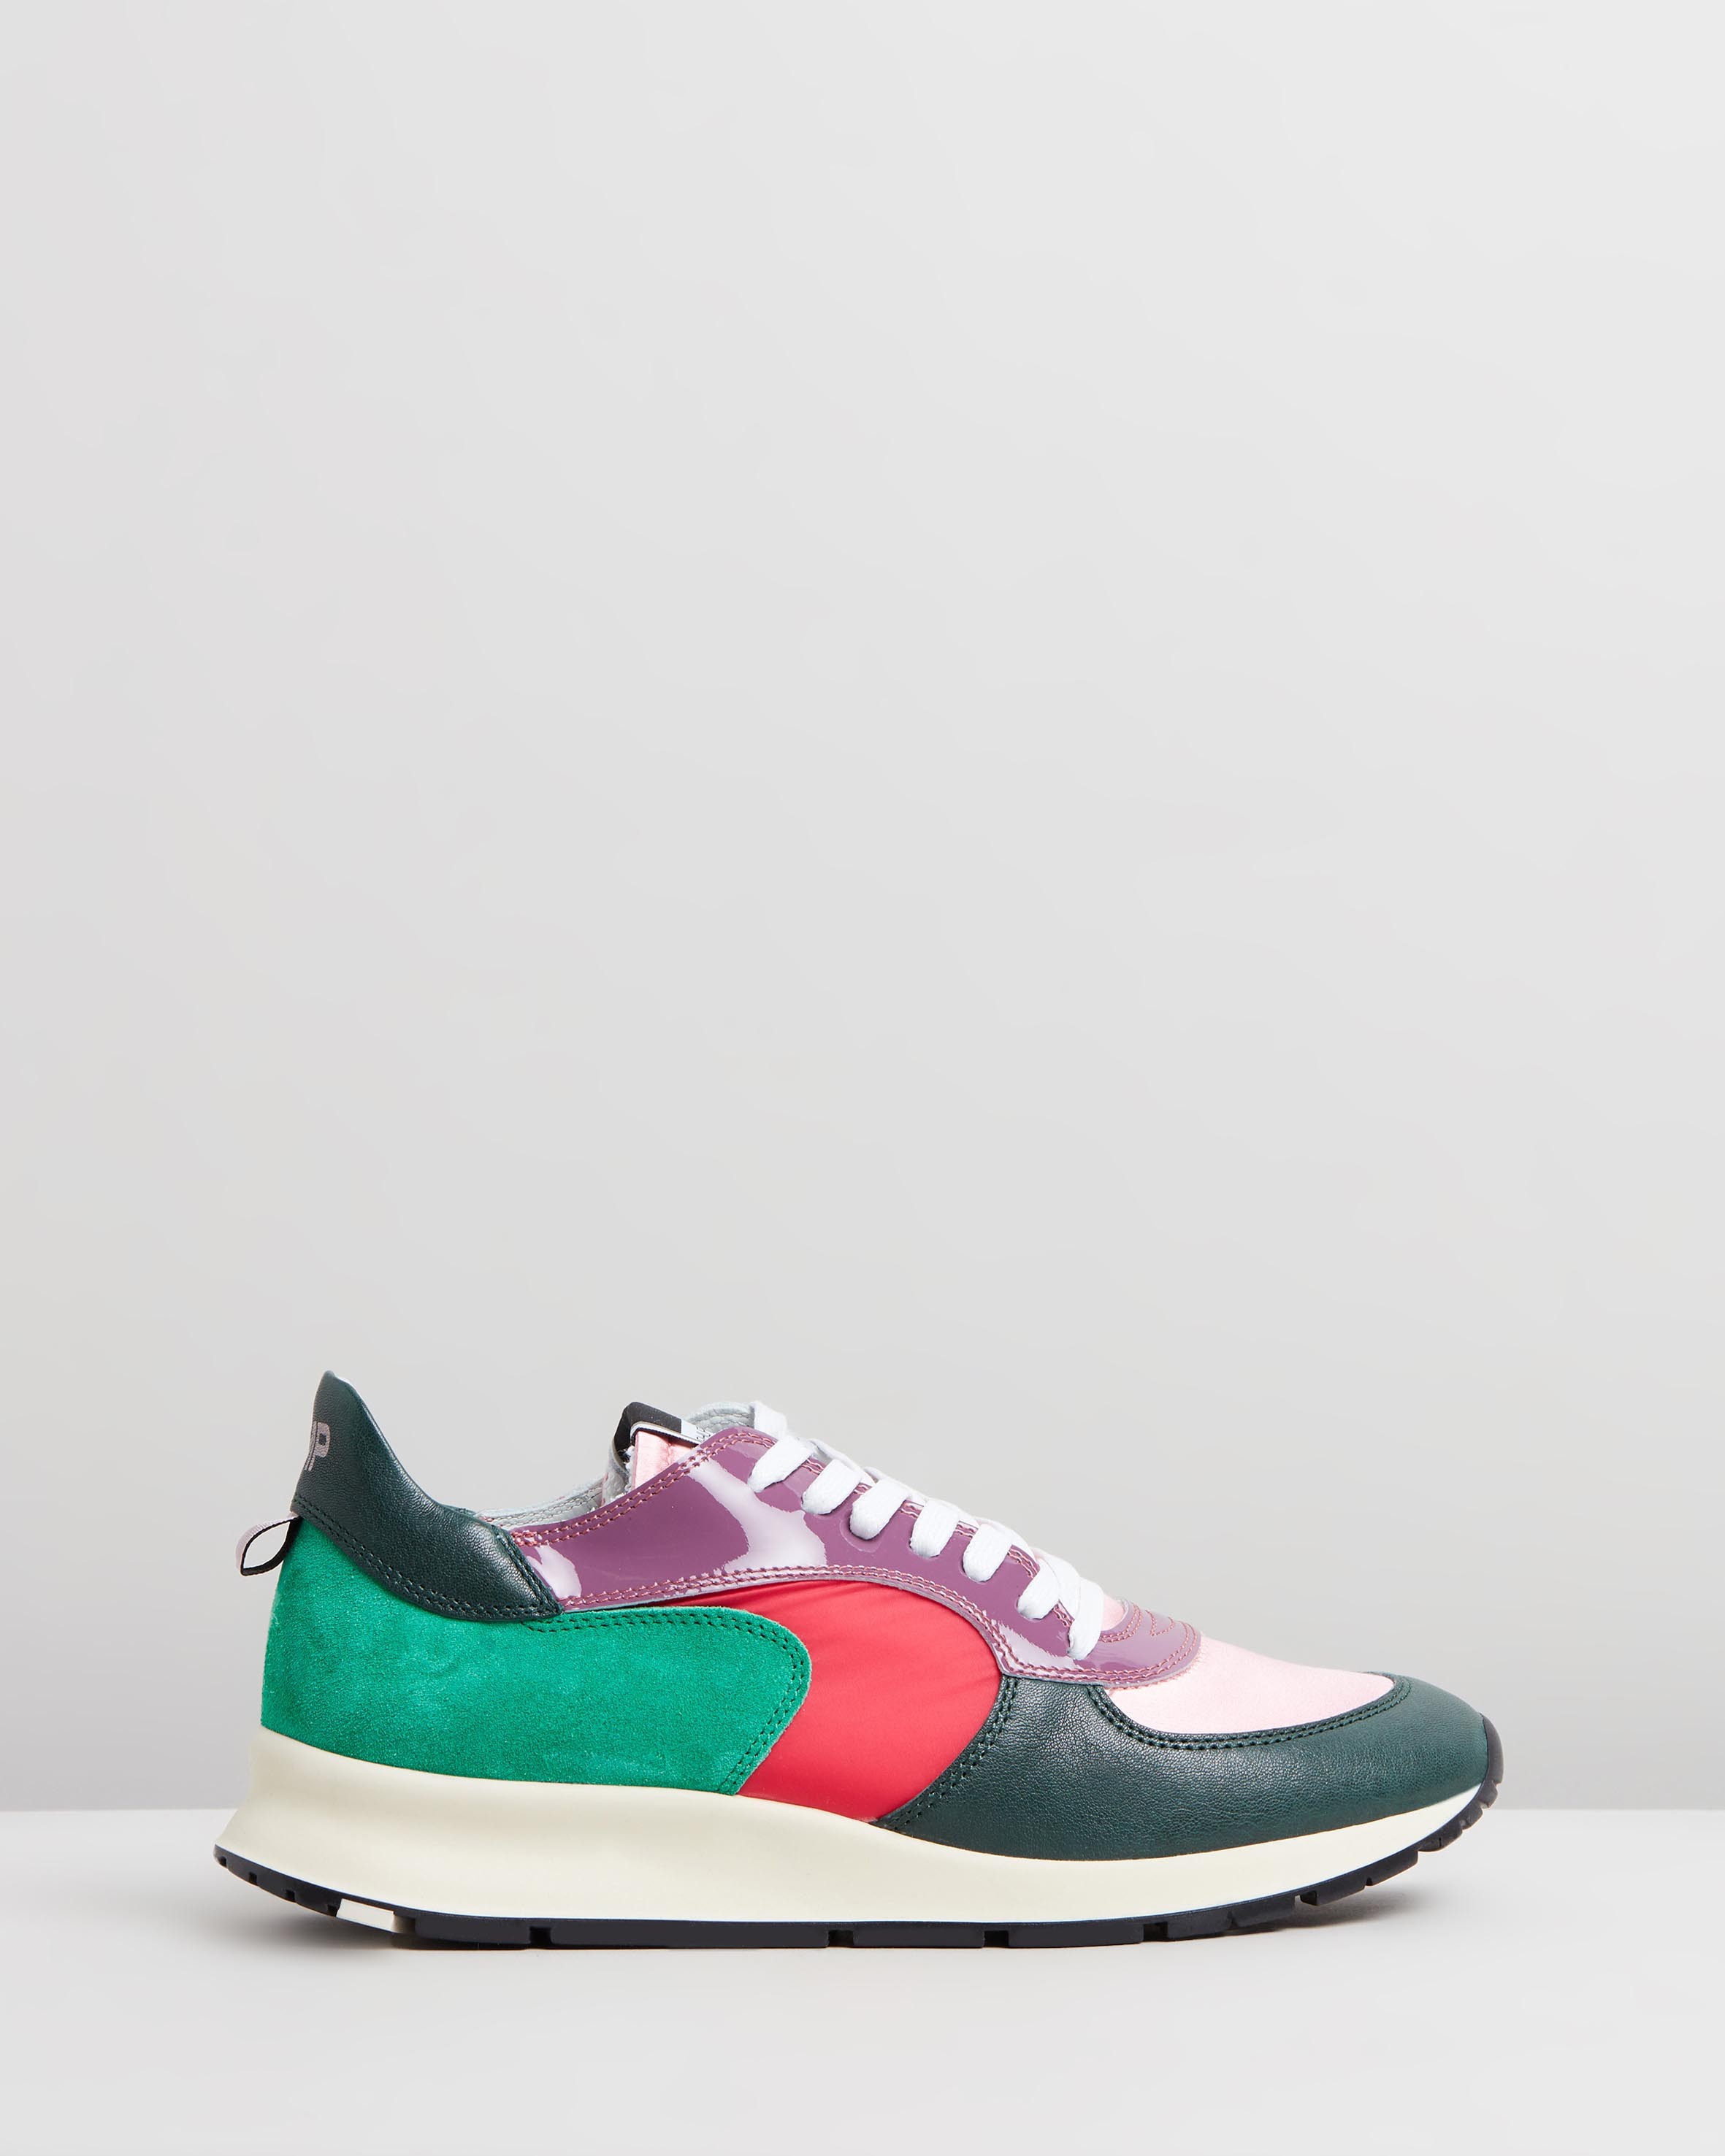 Montecarlo Sneakers Multi by Philippe Model | ShoeSales